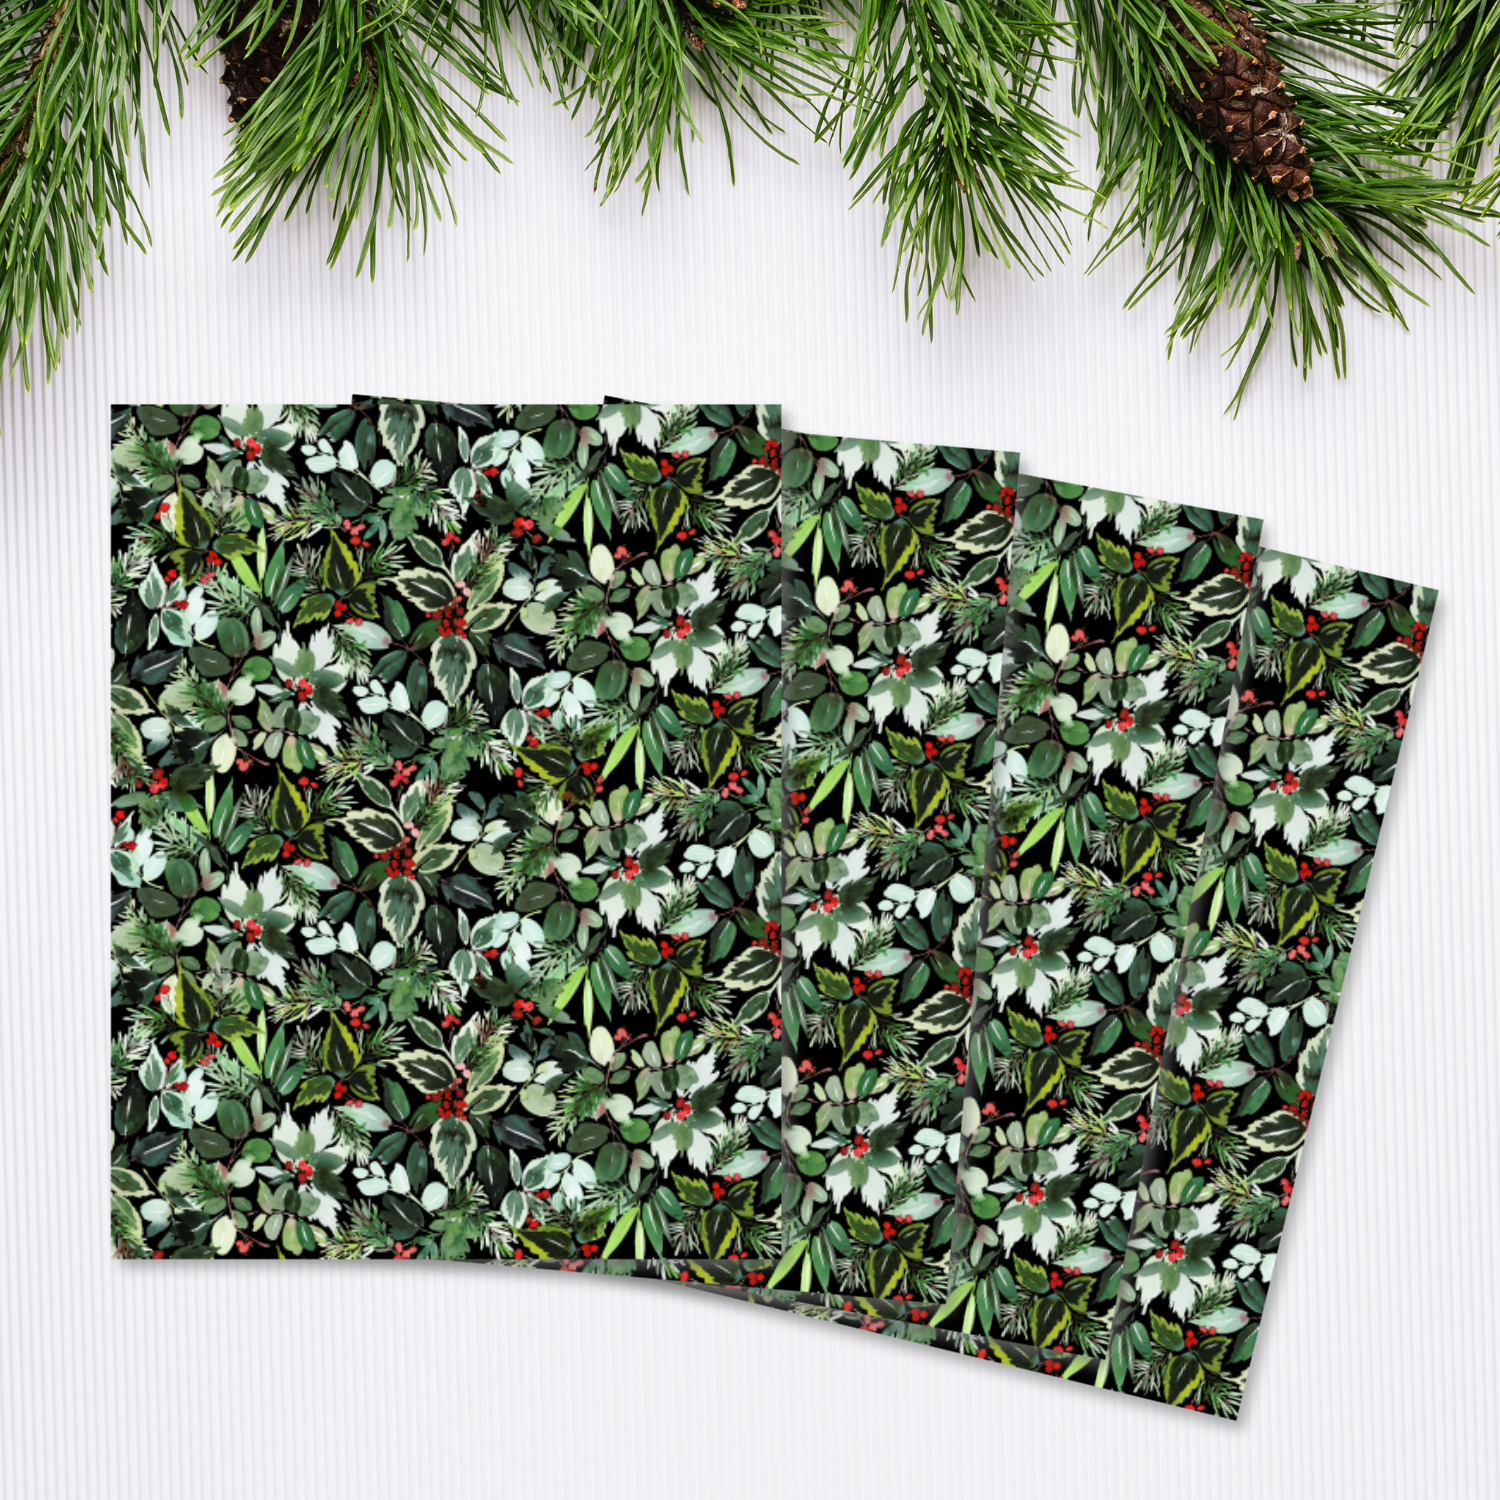 Christmas themed transfer sheet adorned with winter botanicals prints.